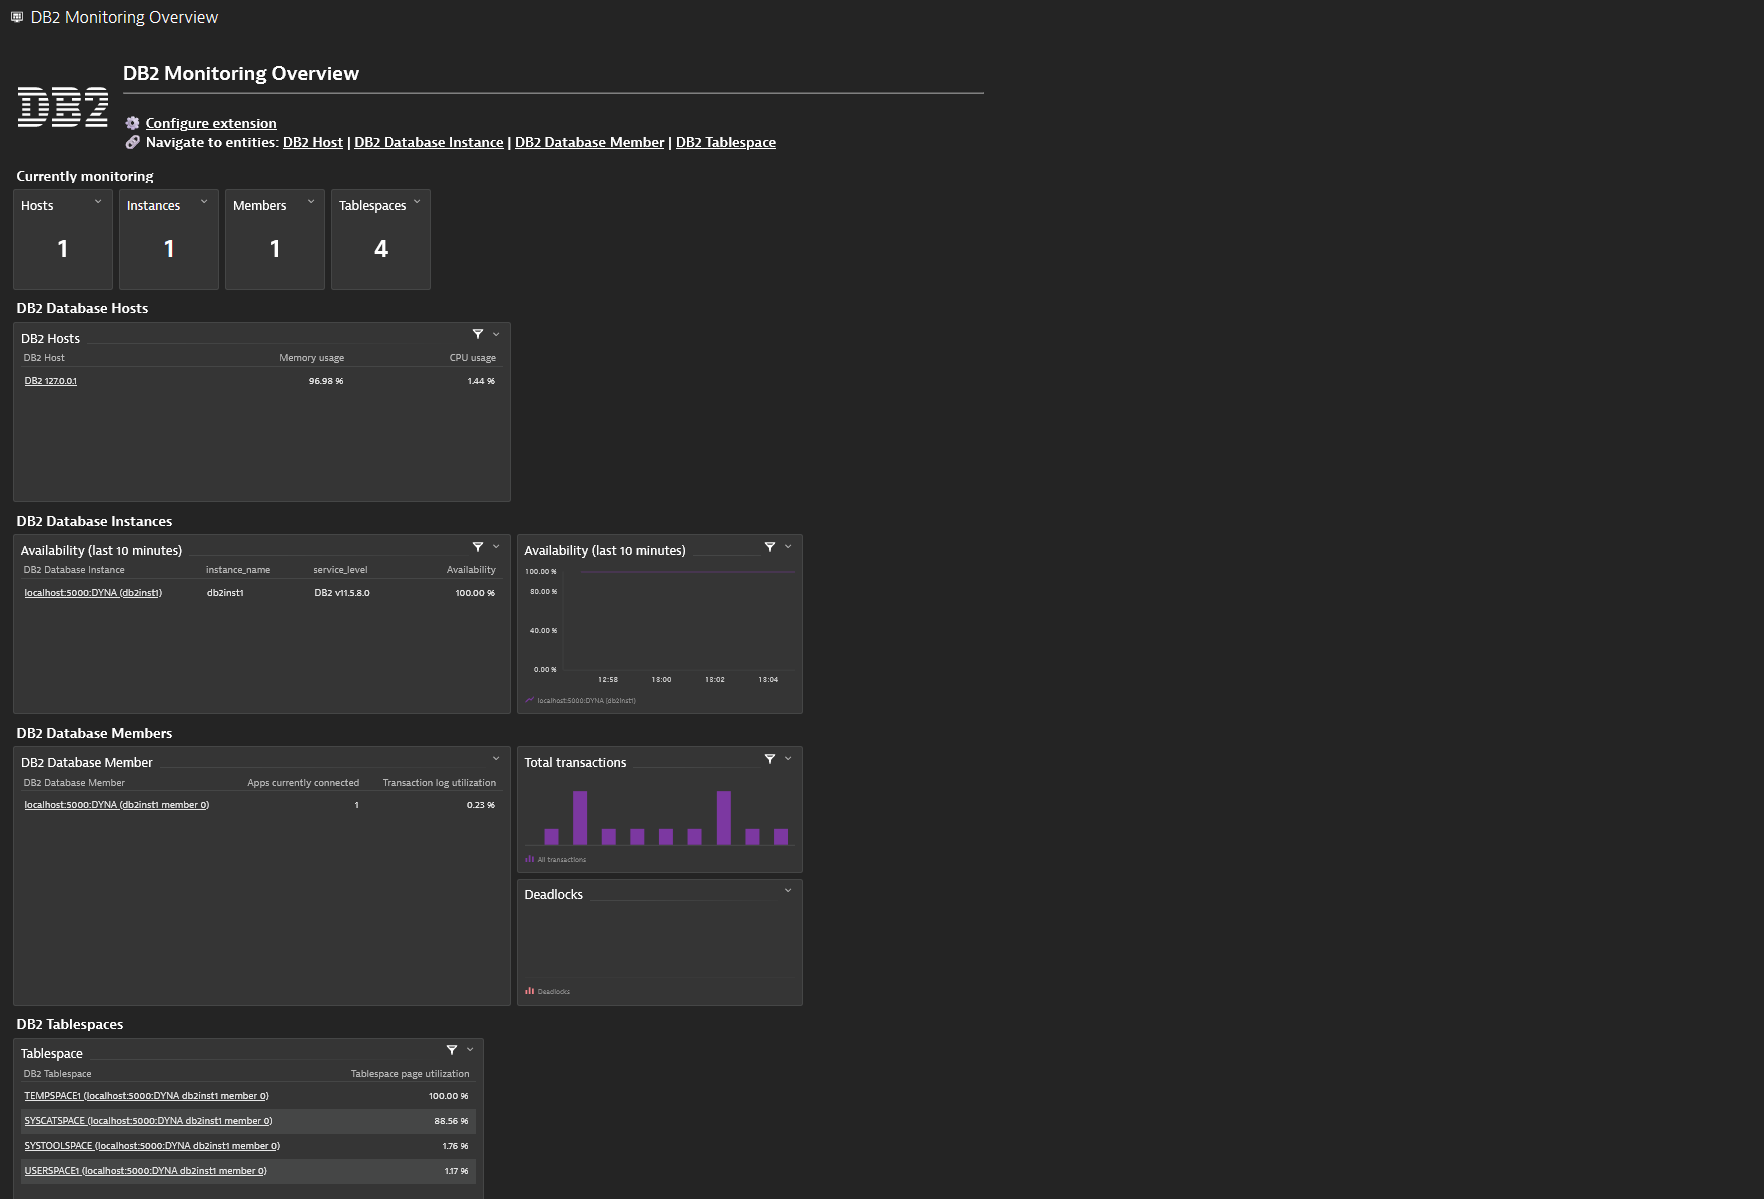 The DB2 Overview dashboard showing links to the different entity types and several metrics.